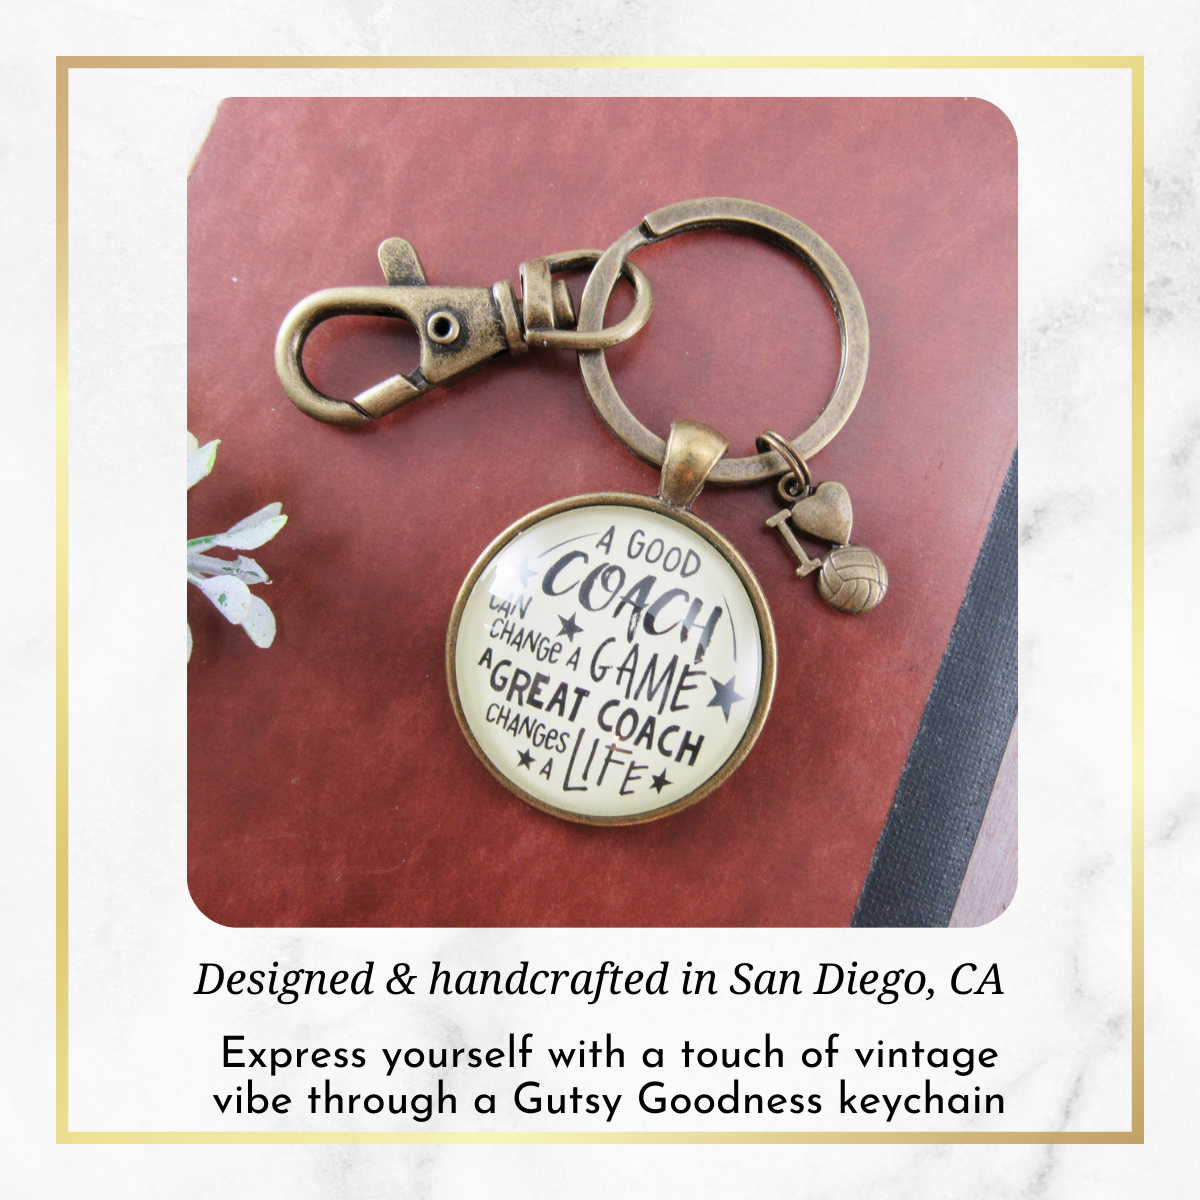 Volleyball Coaching Sport Keychain Great Coach Changes Life Thank You Gift - Gutsy Goodness Handmade Jewelry;Volleyball Coaching Sport Keychain Great Coach Changes Life Thank You Gift - Gutsy Goodness Handmade Jewelry Gifts